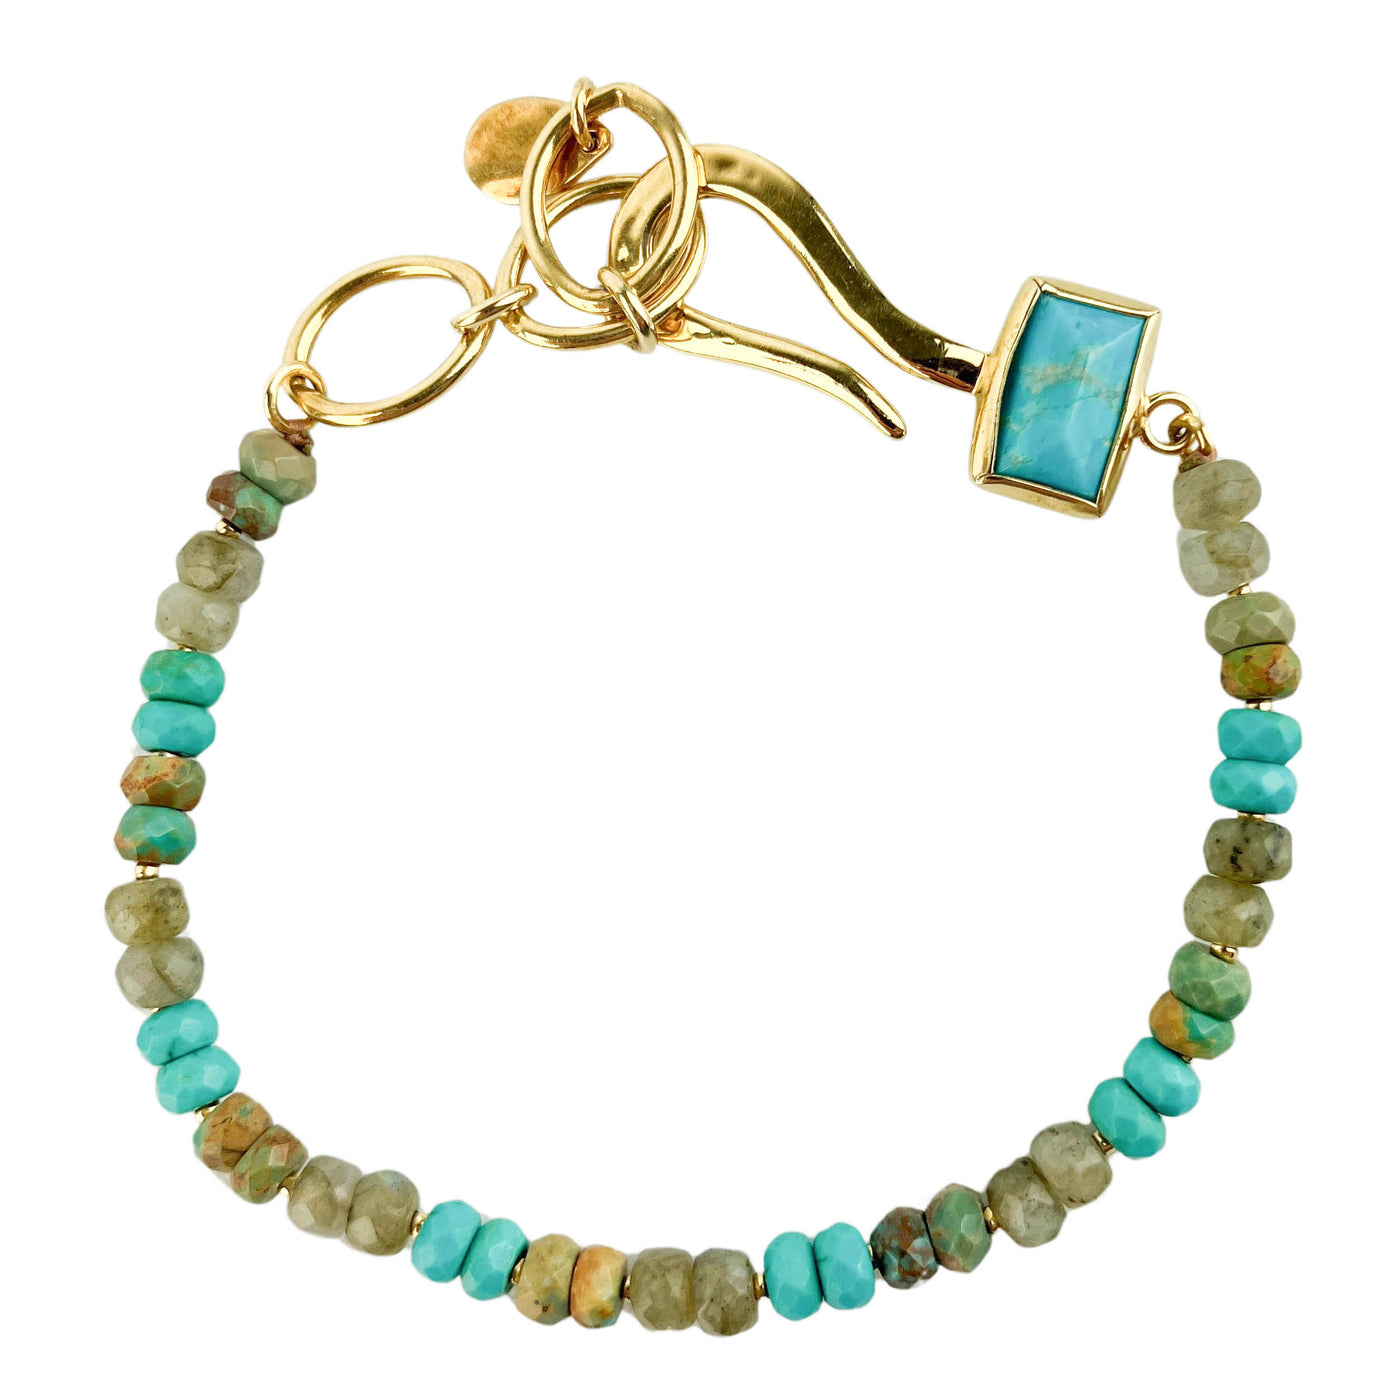 Chan Luu Odyssey Hook Bracelet in Turquoise Mix - Discounts on Chan Luu at UAL